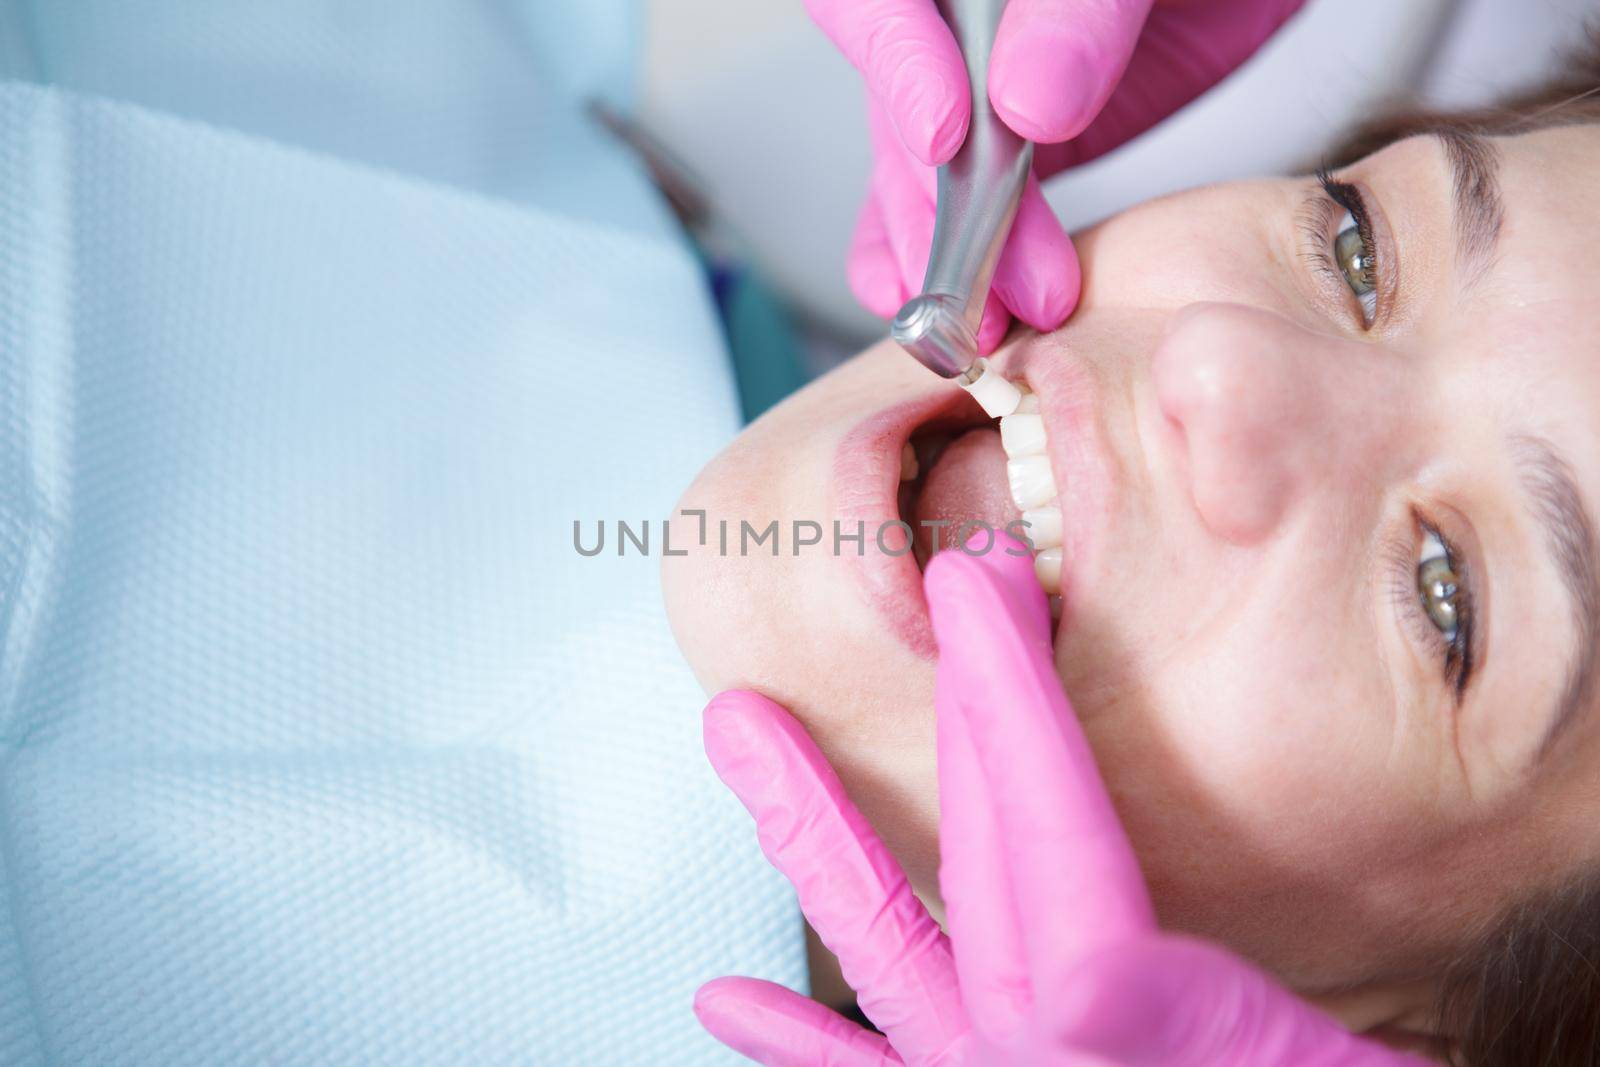 Cropped close up of a mature woman having her teeth cleaned professionally by her dentist